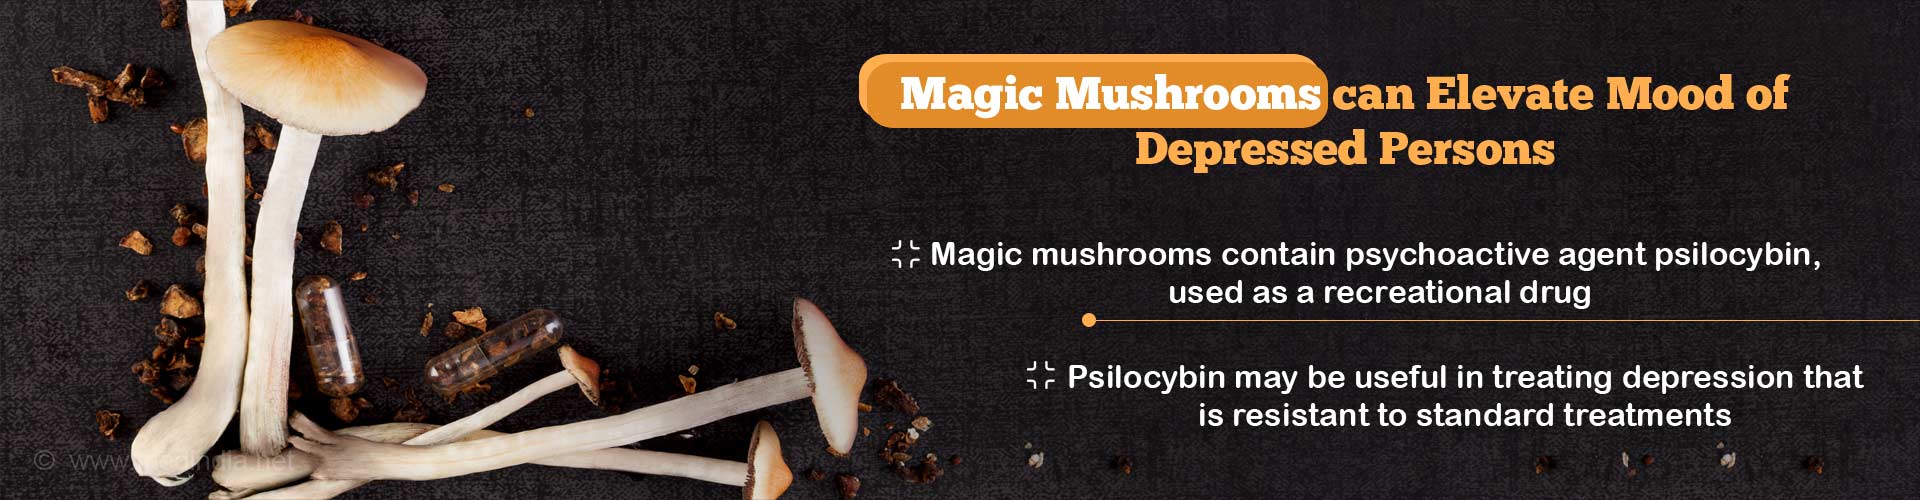 Magic mushrooms can elevate mood of depressed persons
- Magic mushrooms contain psychoactive agent psilocybin, used as a recreational drug
- Psilocybin may be useful in treating depression that is resistant to standard treatments